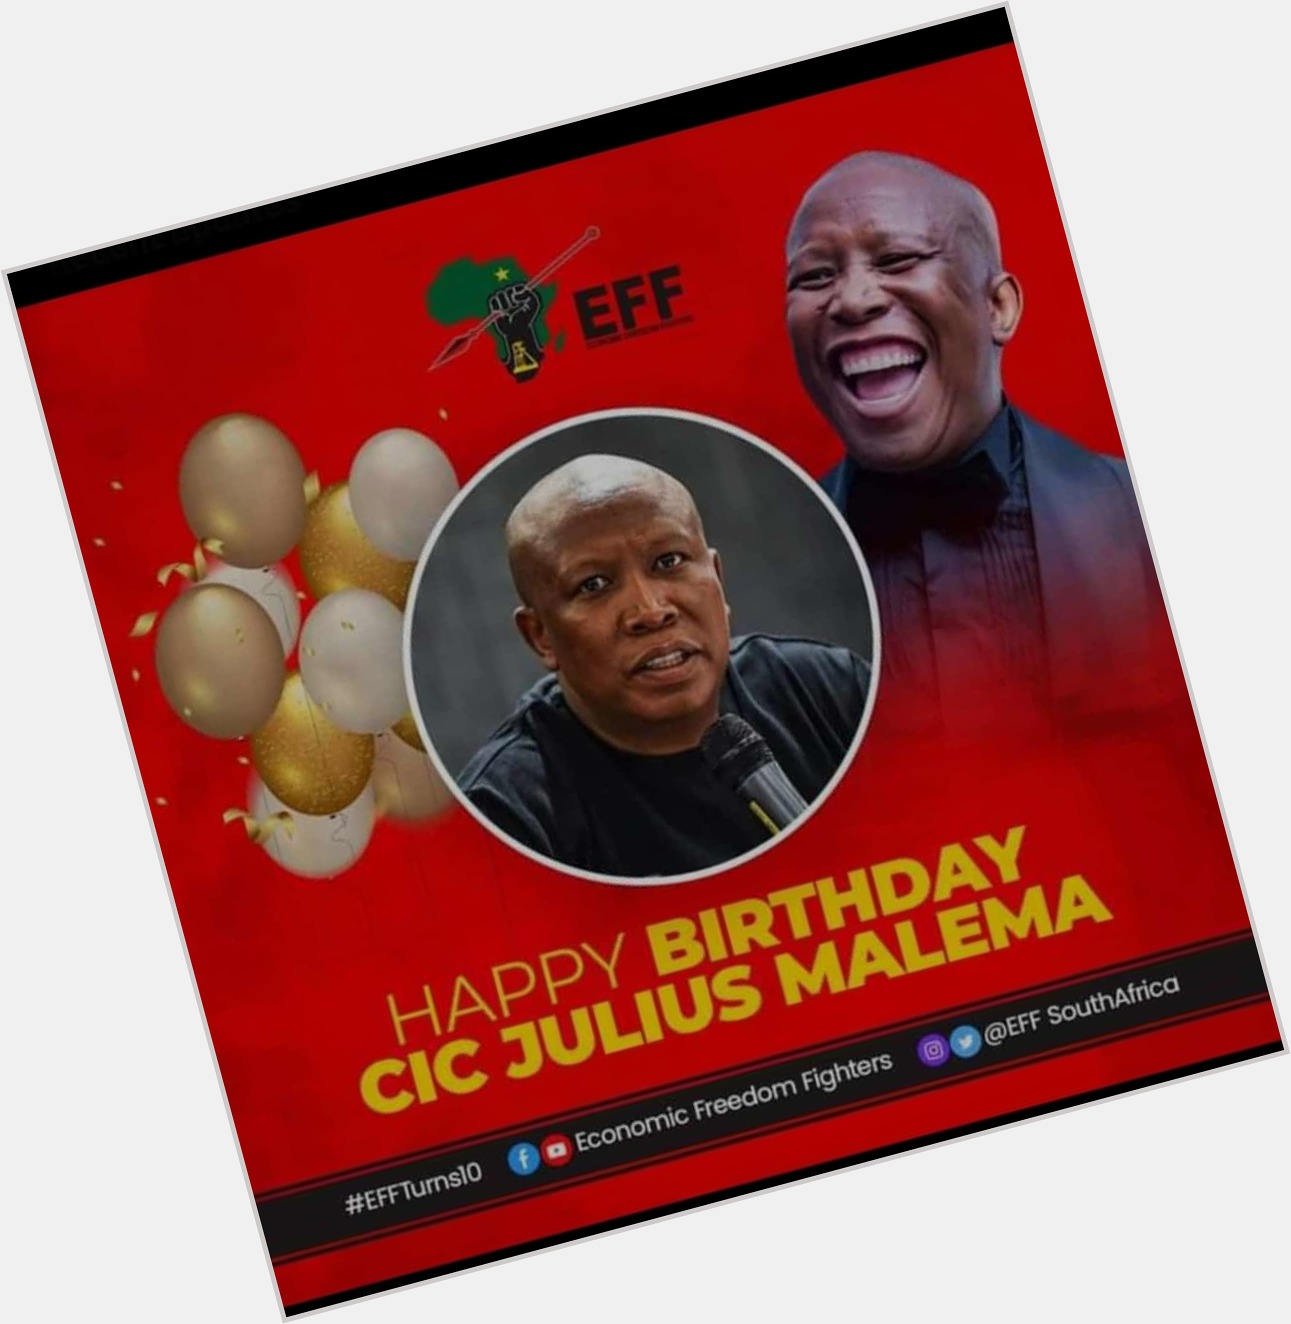 Our biggest problem is that our intelligence is not intelligent!- J. Malema!

Happy Birthday Julius Malema! Amandla! 